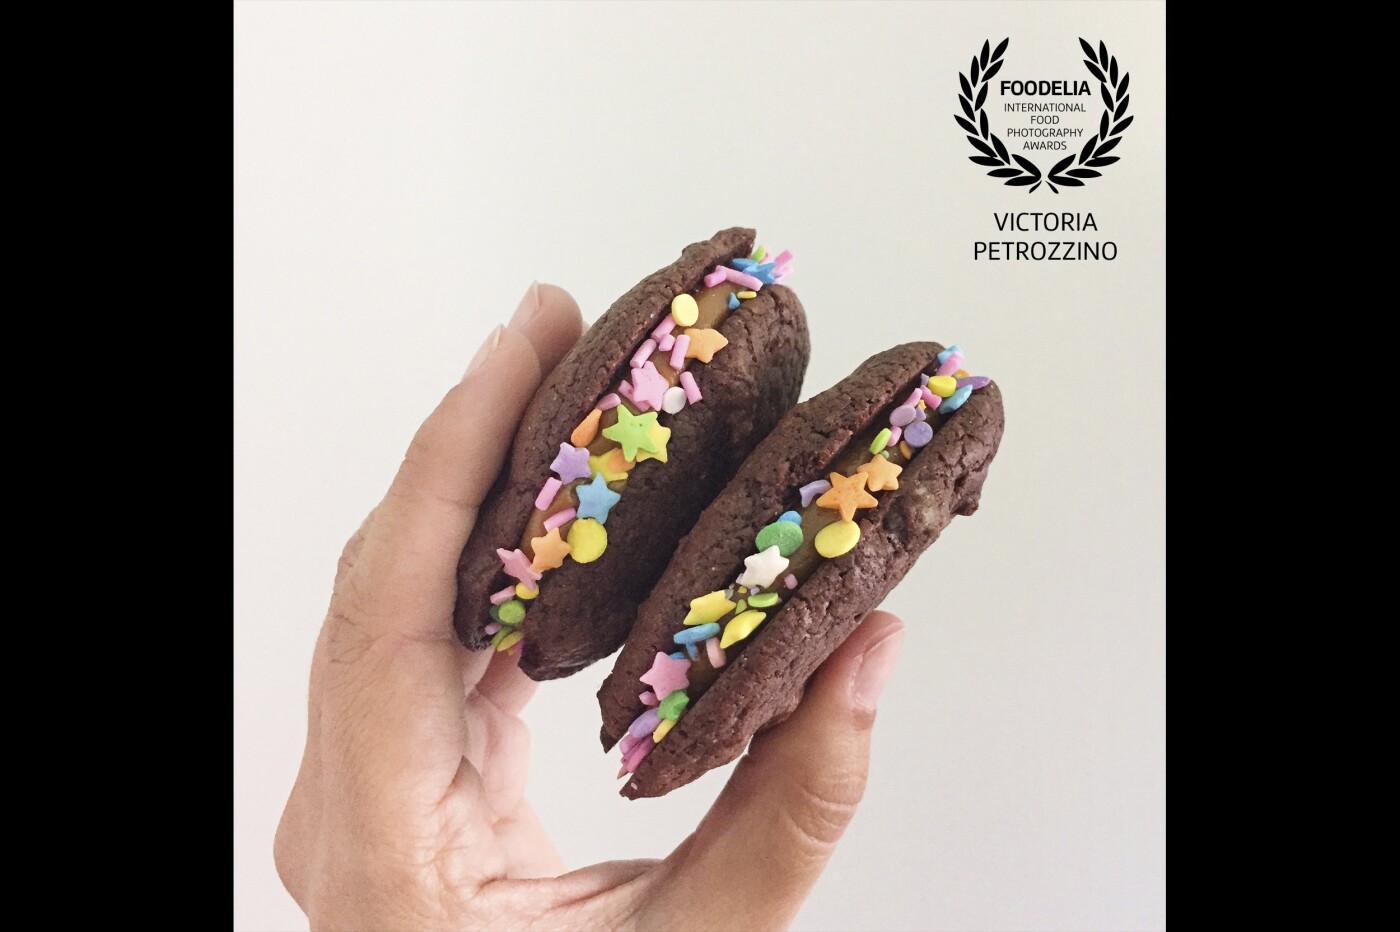 Brownie cookie sandwiches with dulce de leche filling and sprinkles, because life with sprinkles is always better! I always like how a "human" component adds life to a picture so I'm always trying to incorporate my hands when I'm taking pictures of my products!